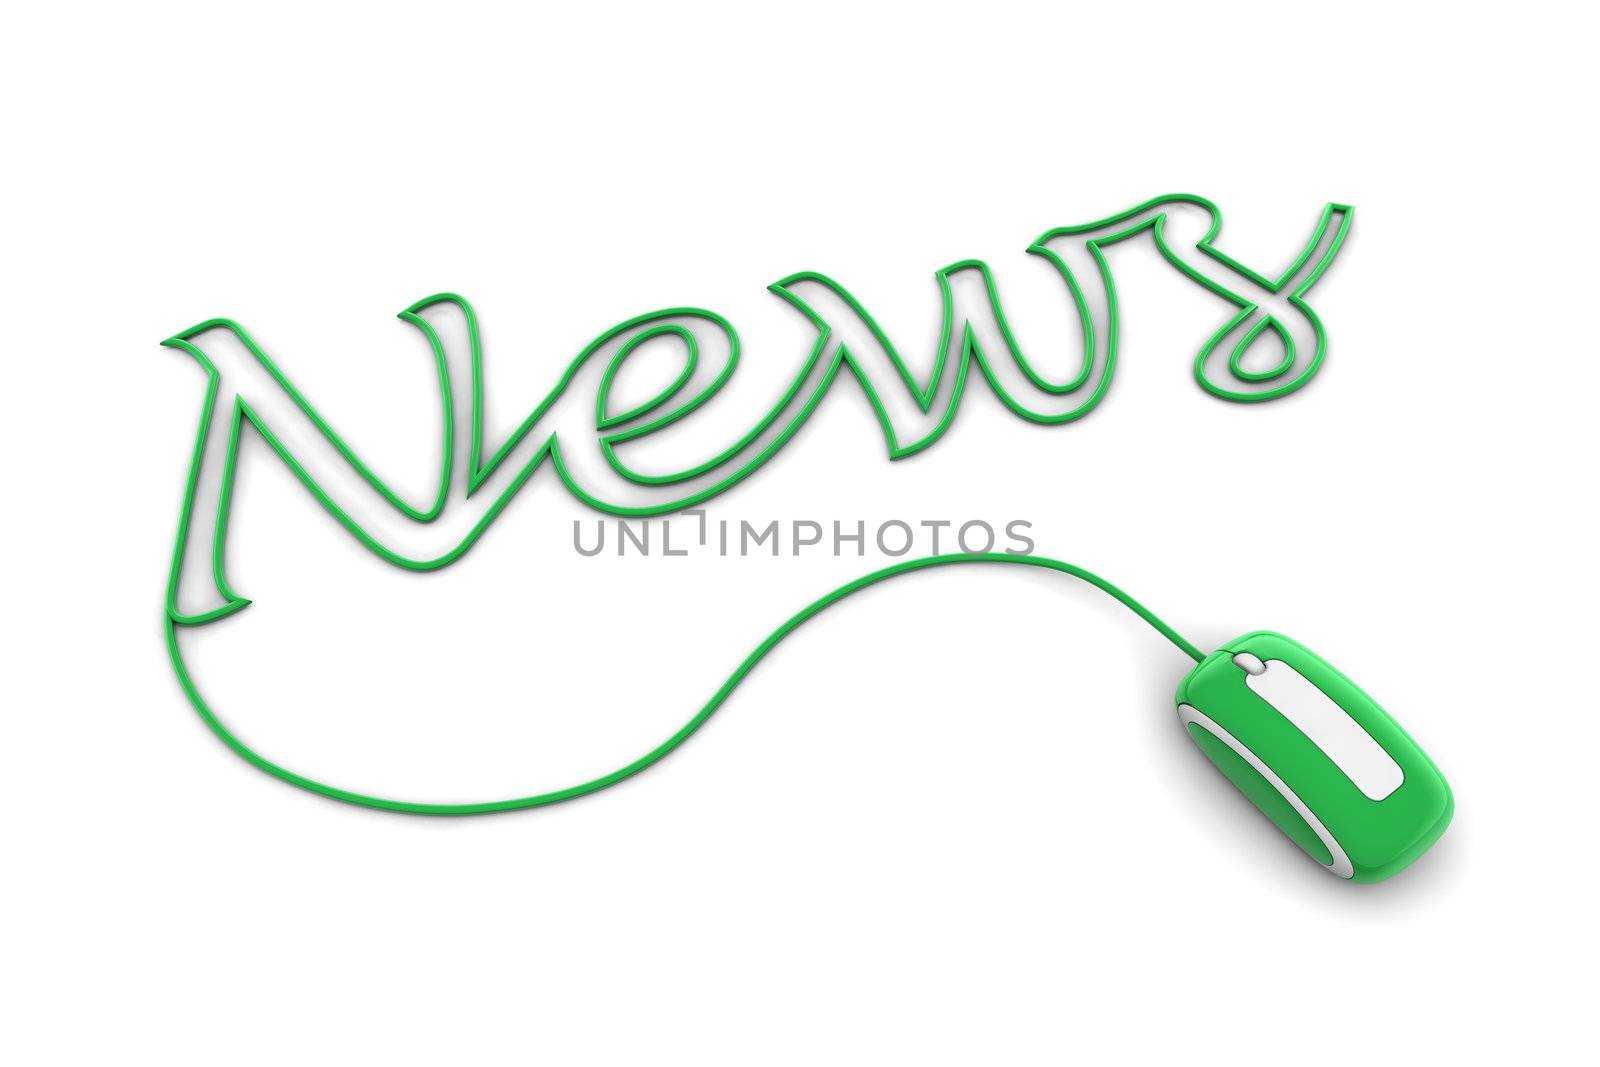 modern shiny green computer mouse is connected to the glossy green word NEWS - letters a formed by the mouse cable